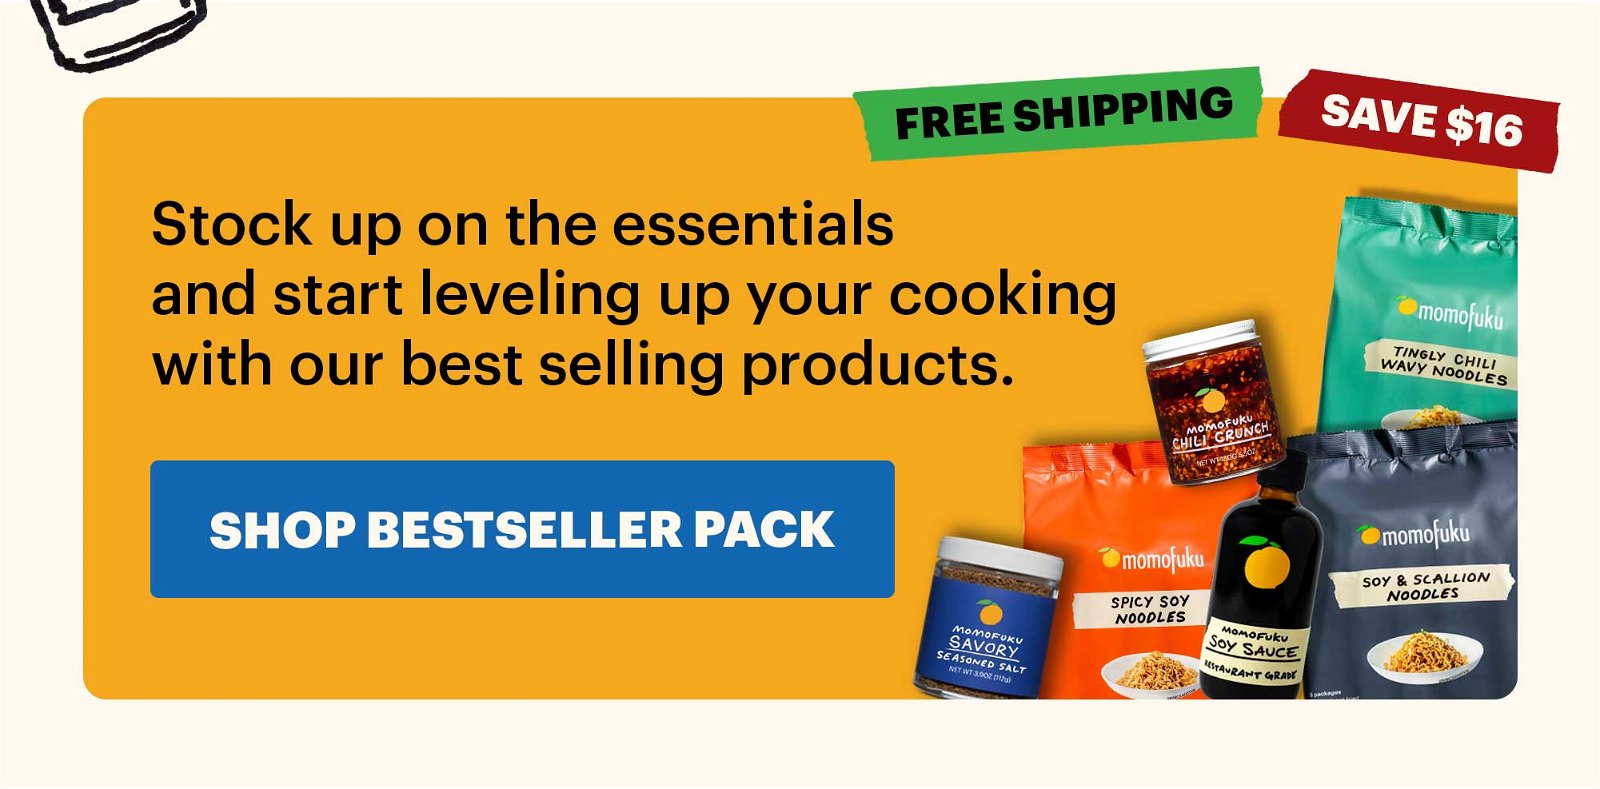 Stock up on the essentials and start leveling up your cooking with our best selling products. SHOP BESTSELLER PACK. FREE SHIPPING, SAVE \\$16